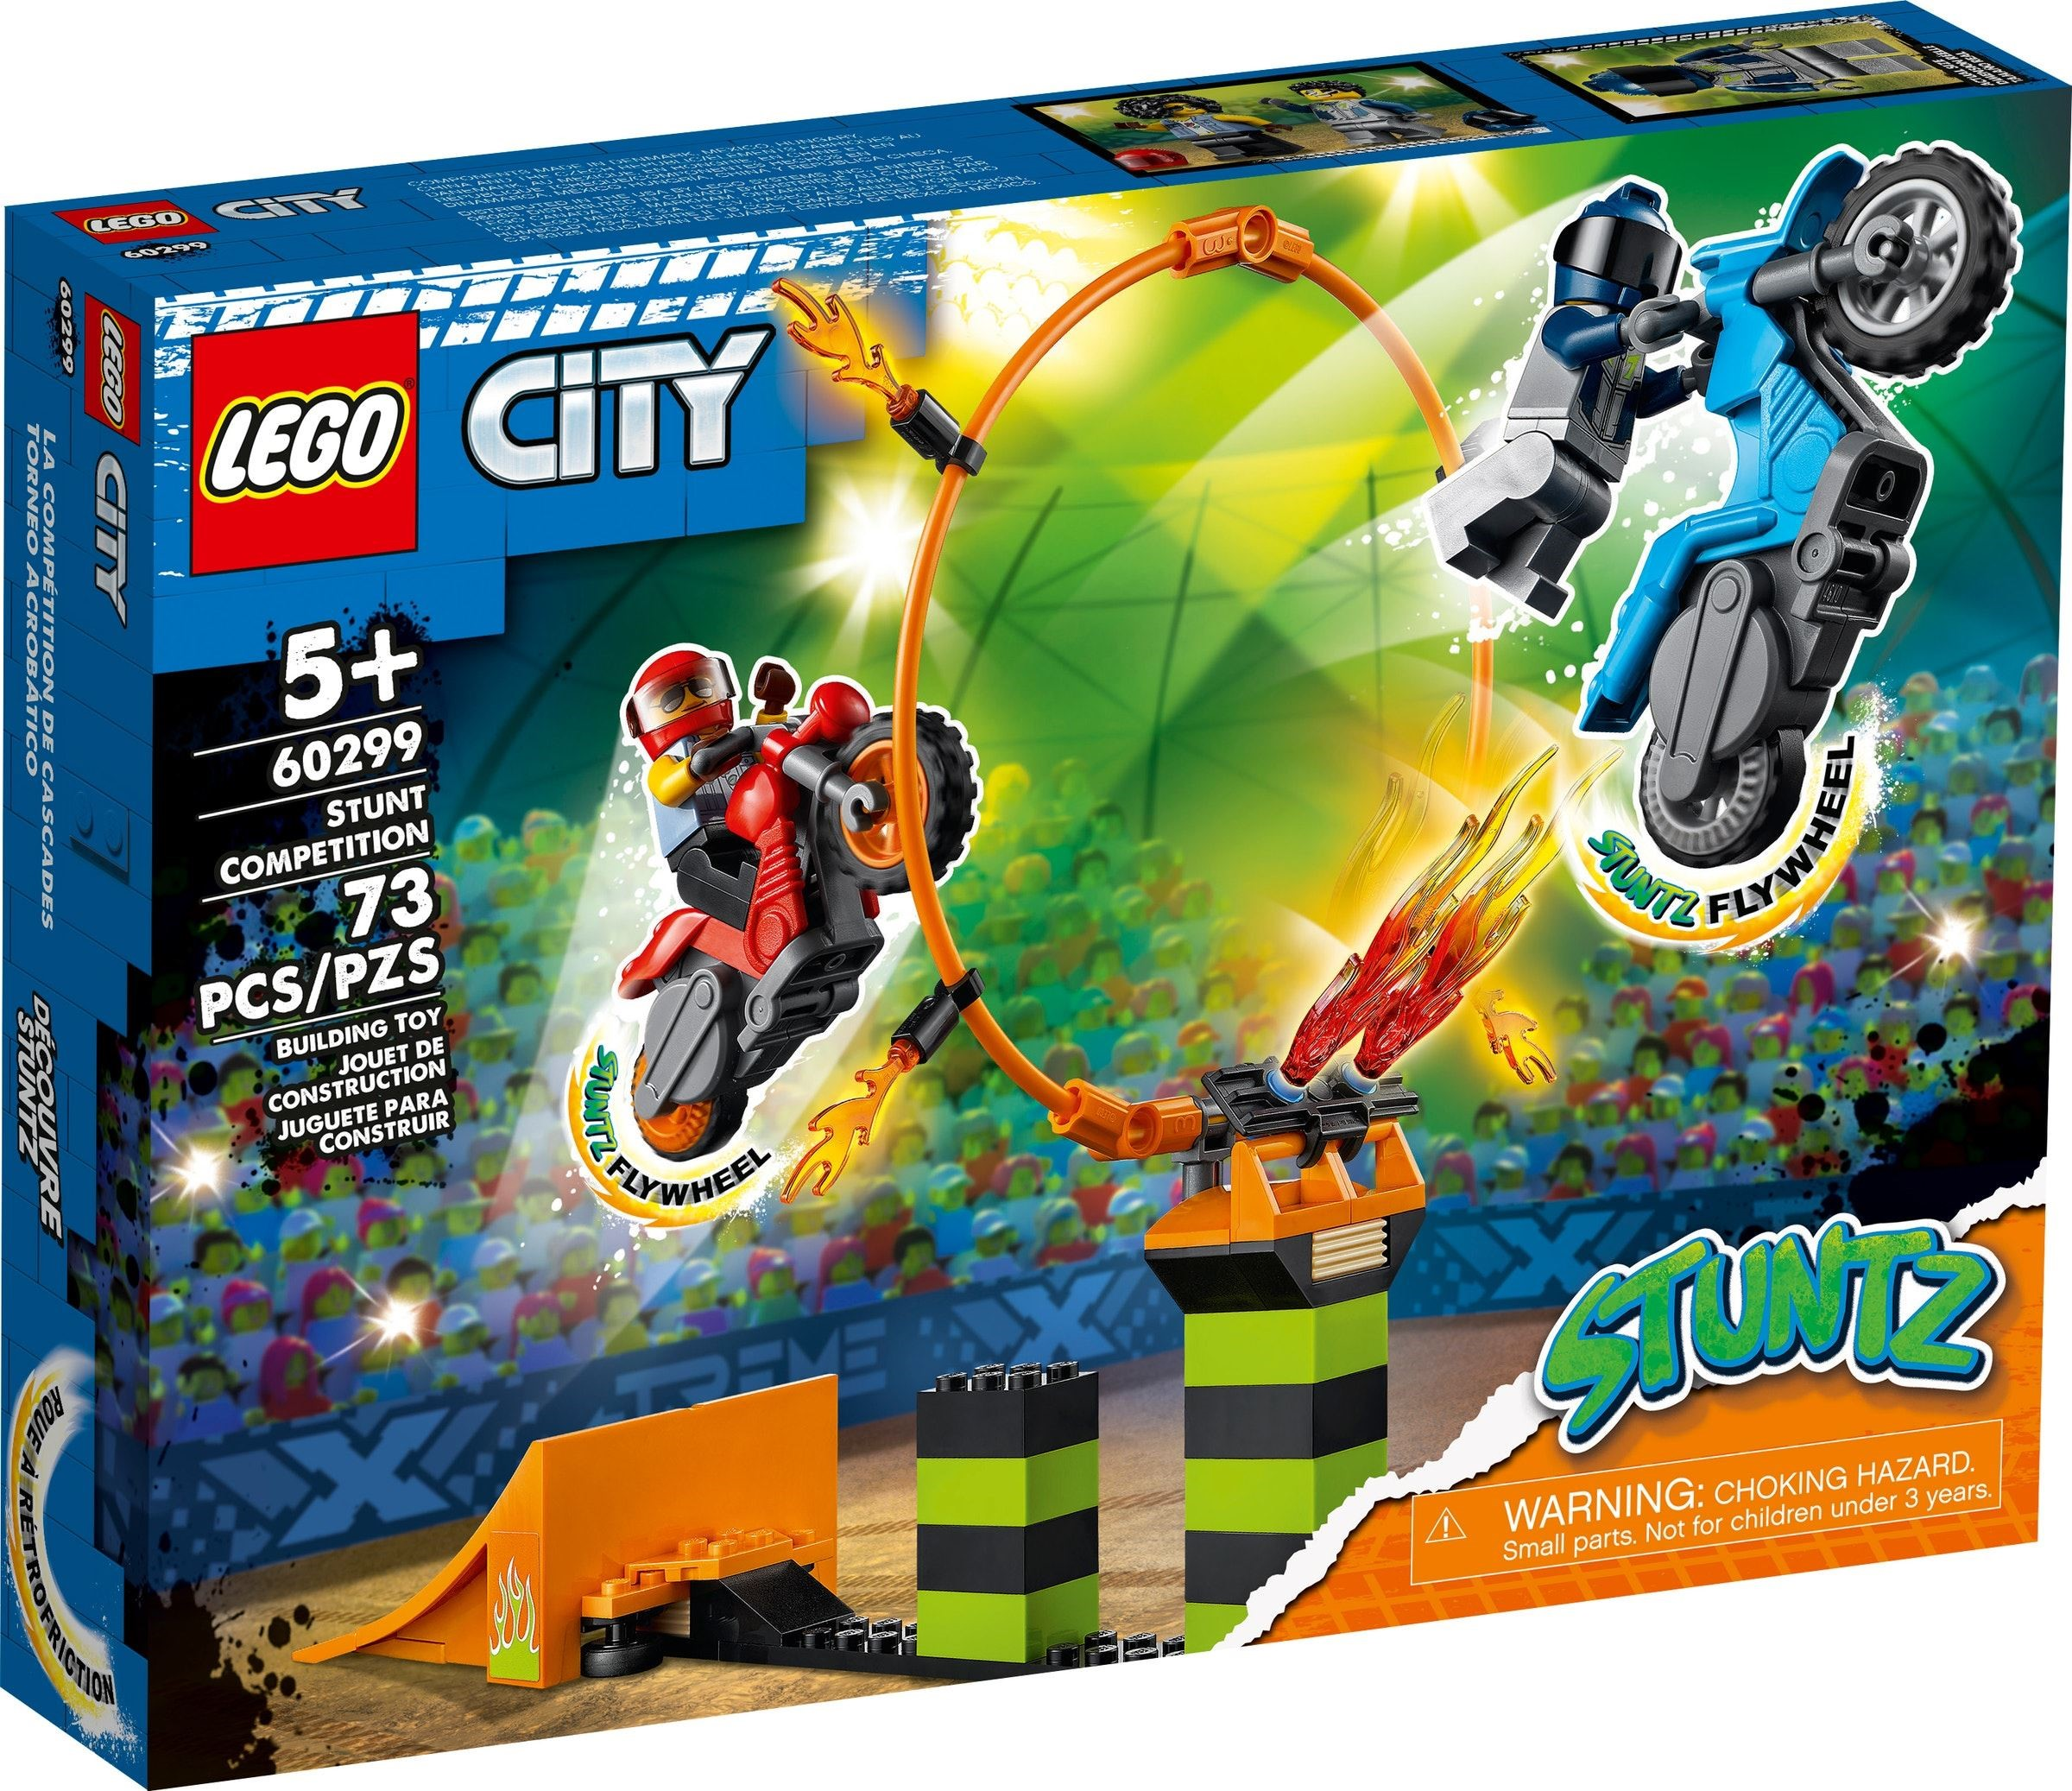 LEGO City Stuntz The Knockdown Stunt Challenge Playset, 60341 Adventure TV  Series Action Toy for Kids Aged 5 Plus with Stunt Bike, Racer & Accessories